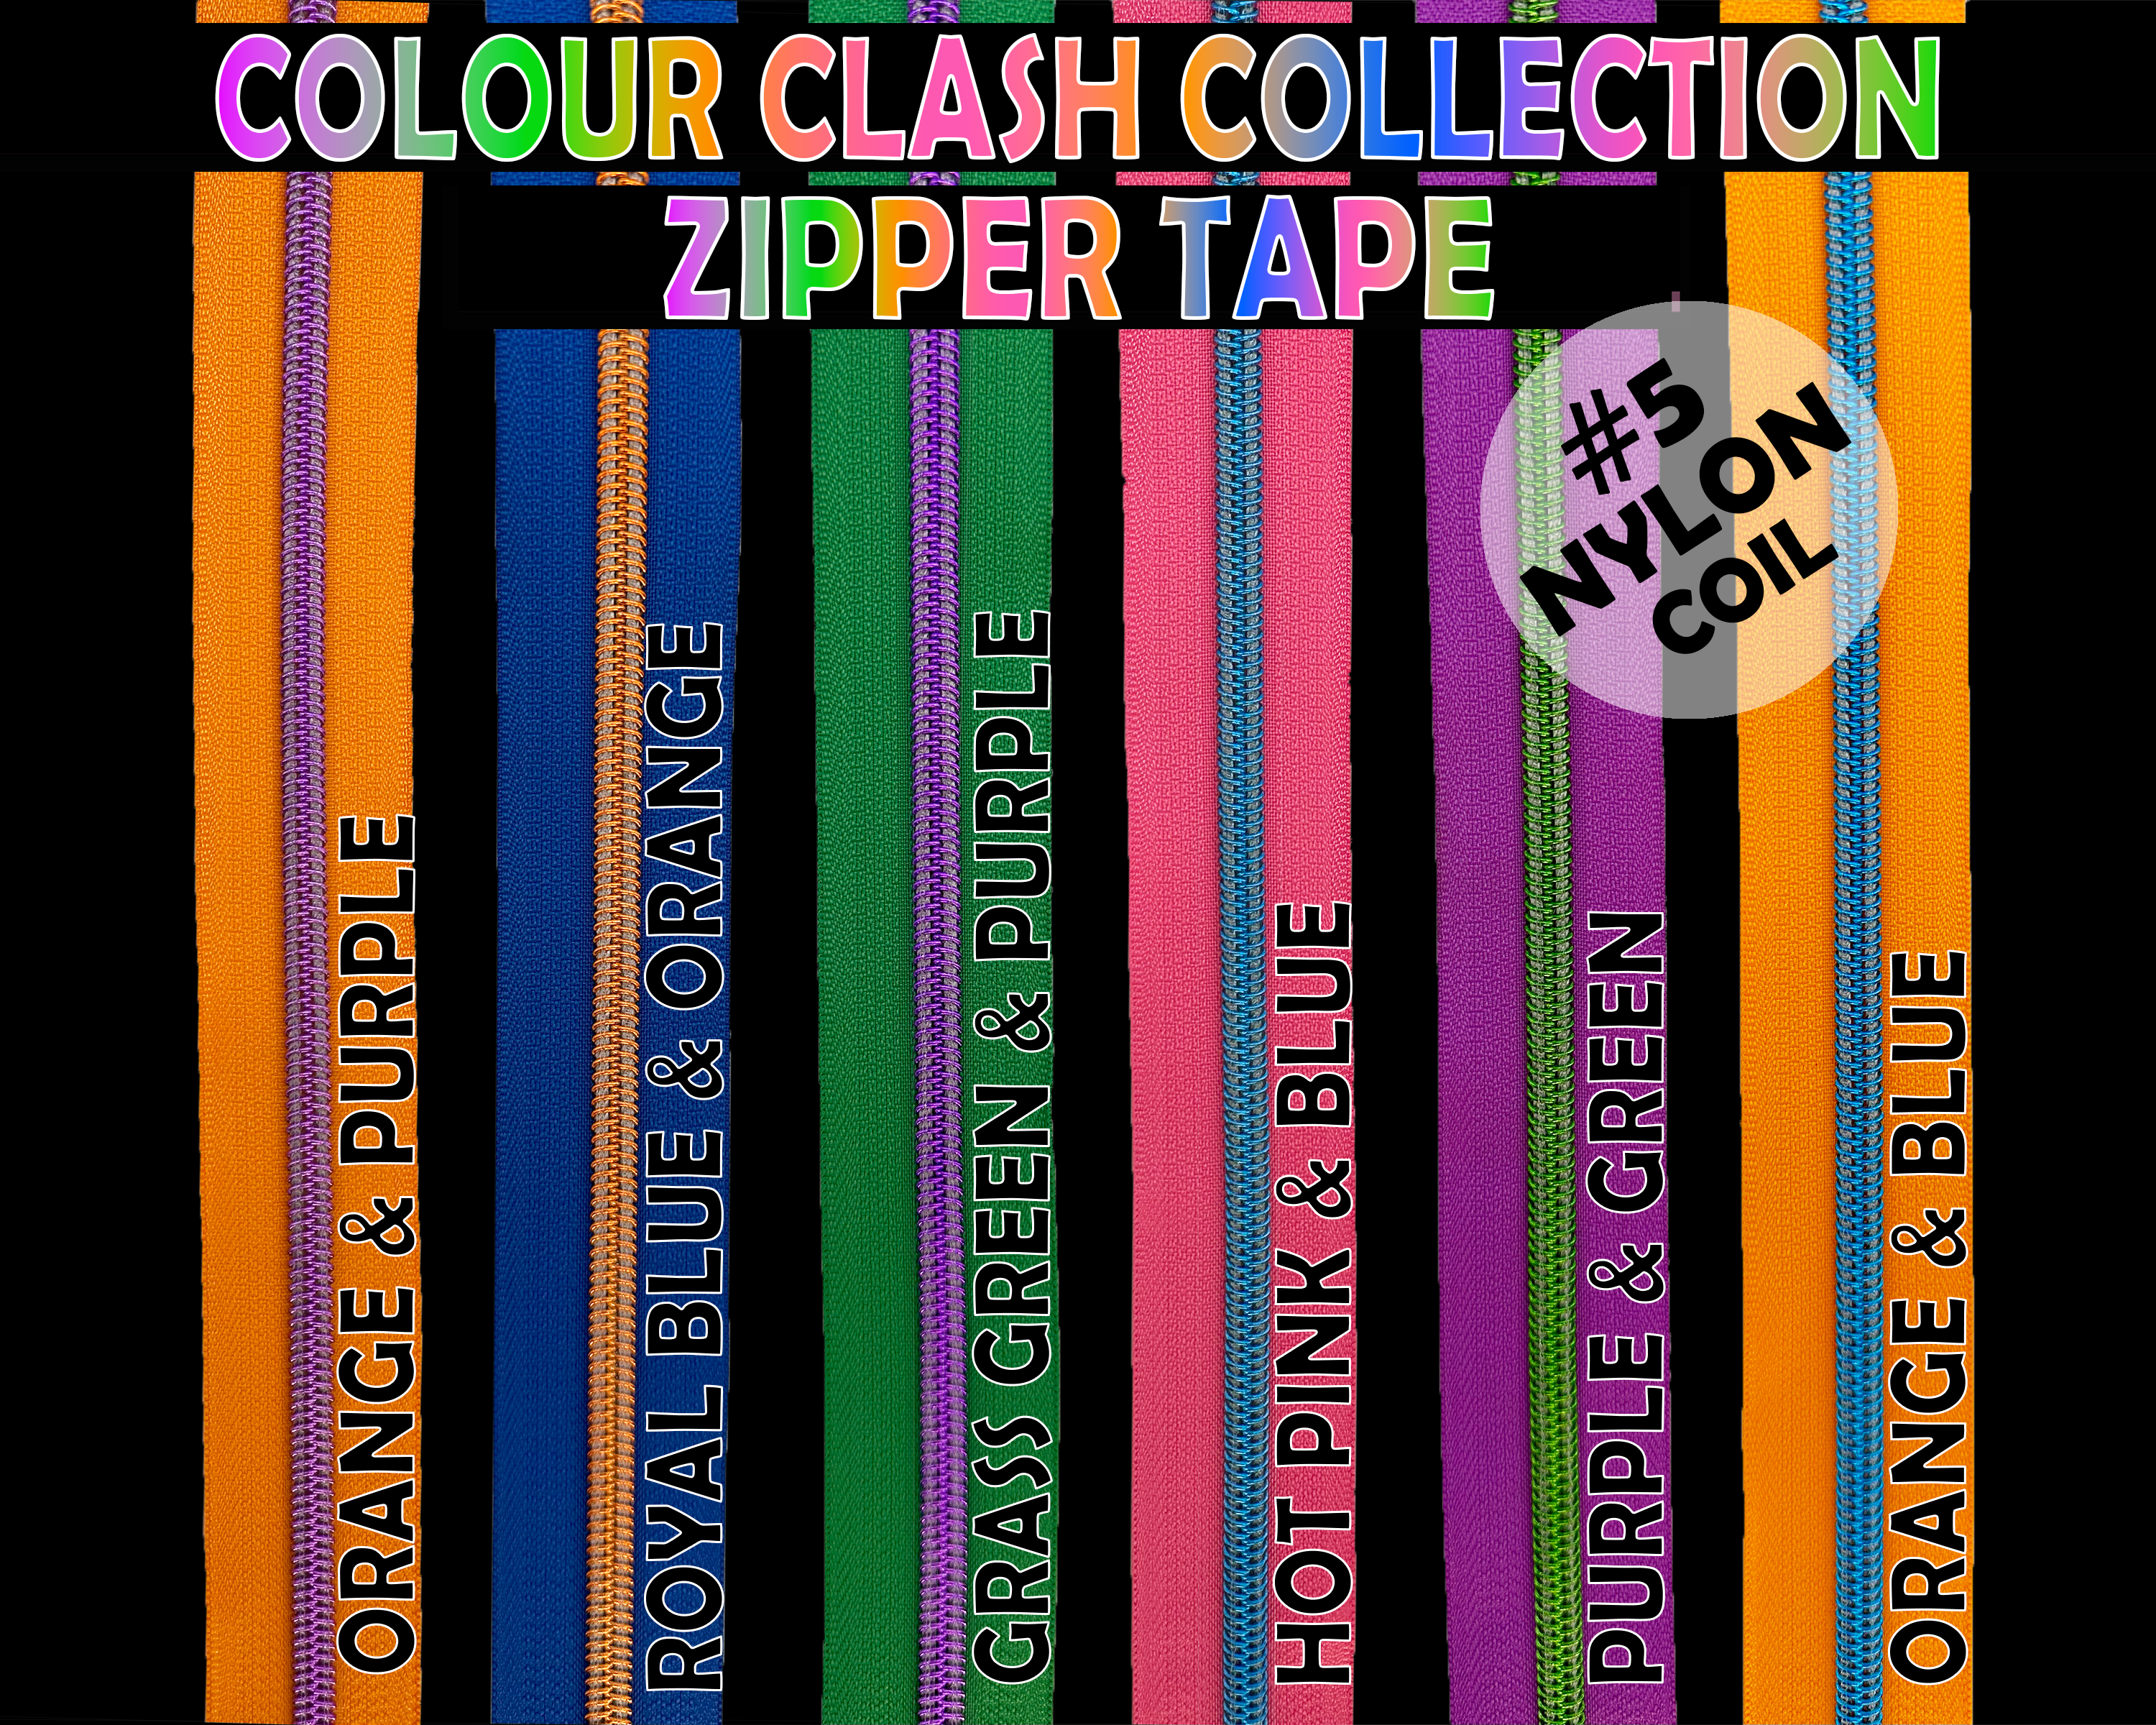 Colour Clash Zipper Tape, Size 5 Nylon Coil with various bright jewel coloured teeth